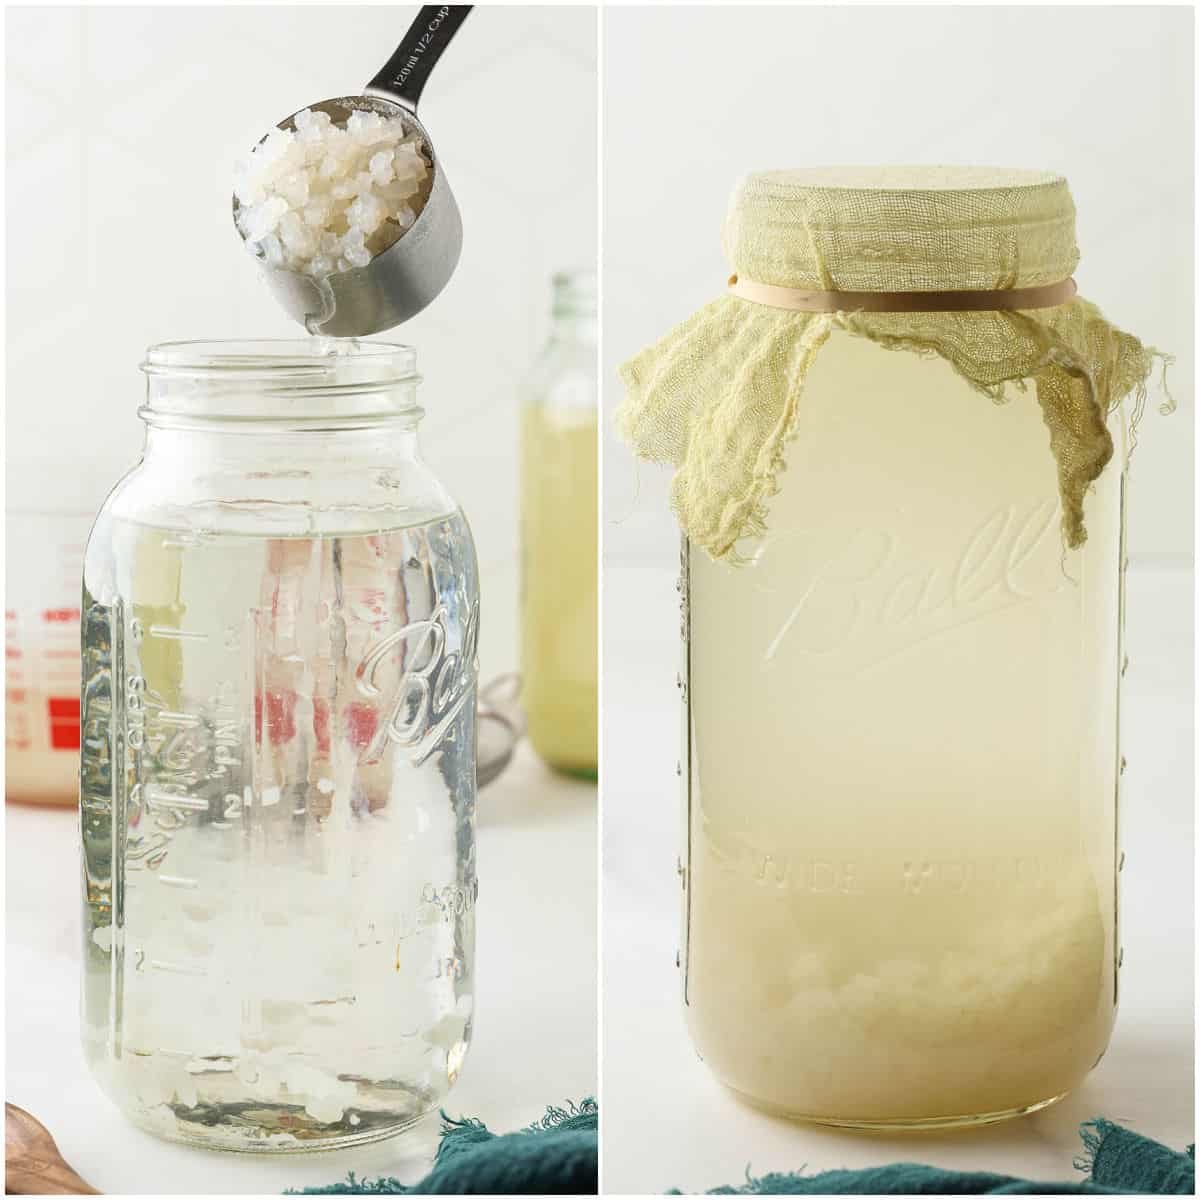 two photos side by side, one of a jar of water with water kefir grains being poured in, and another of a jar of water kefir covered with cheesecloth